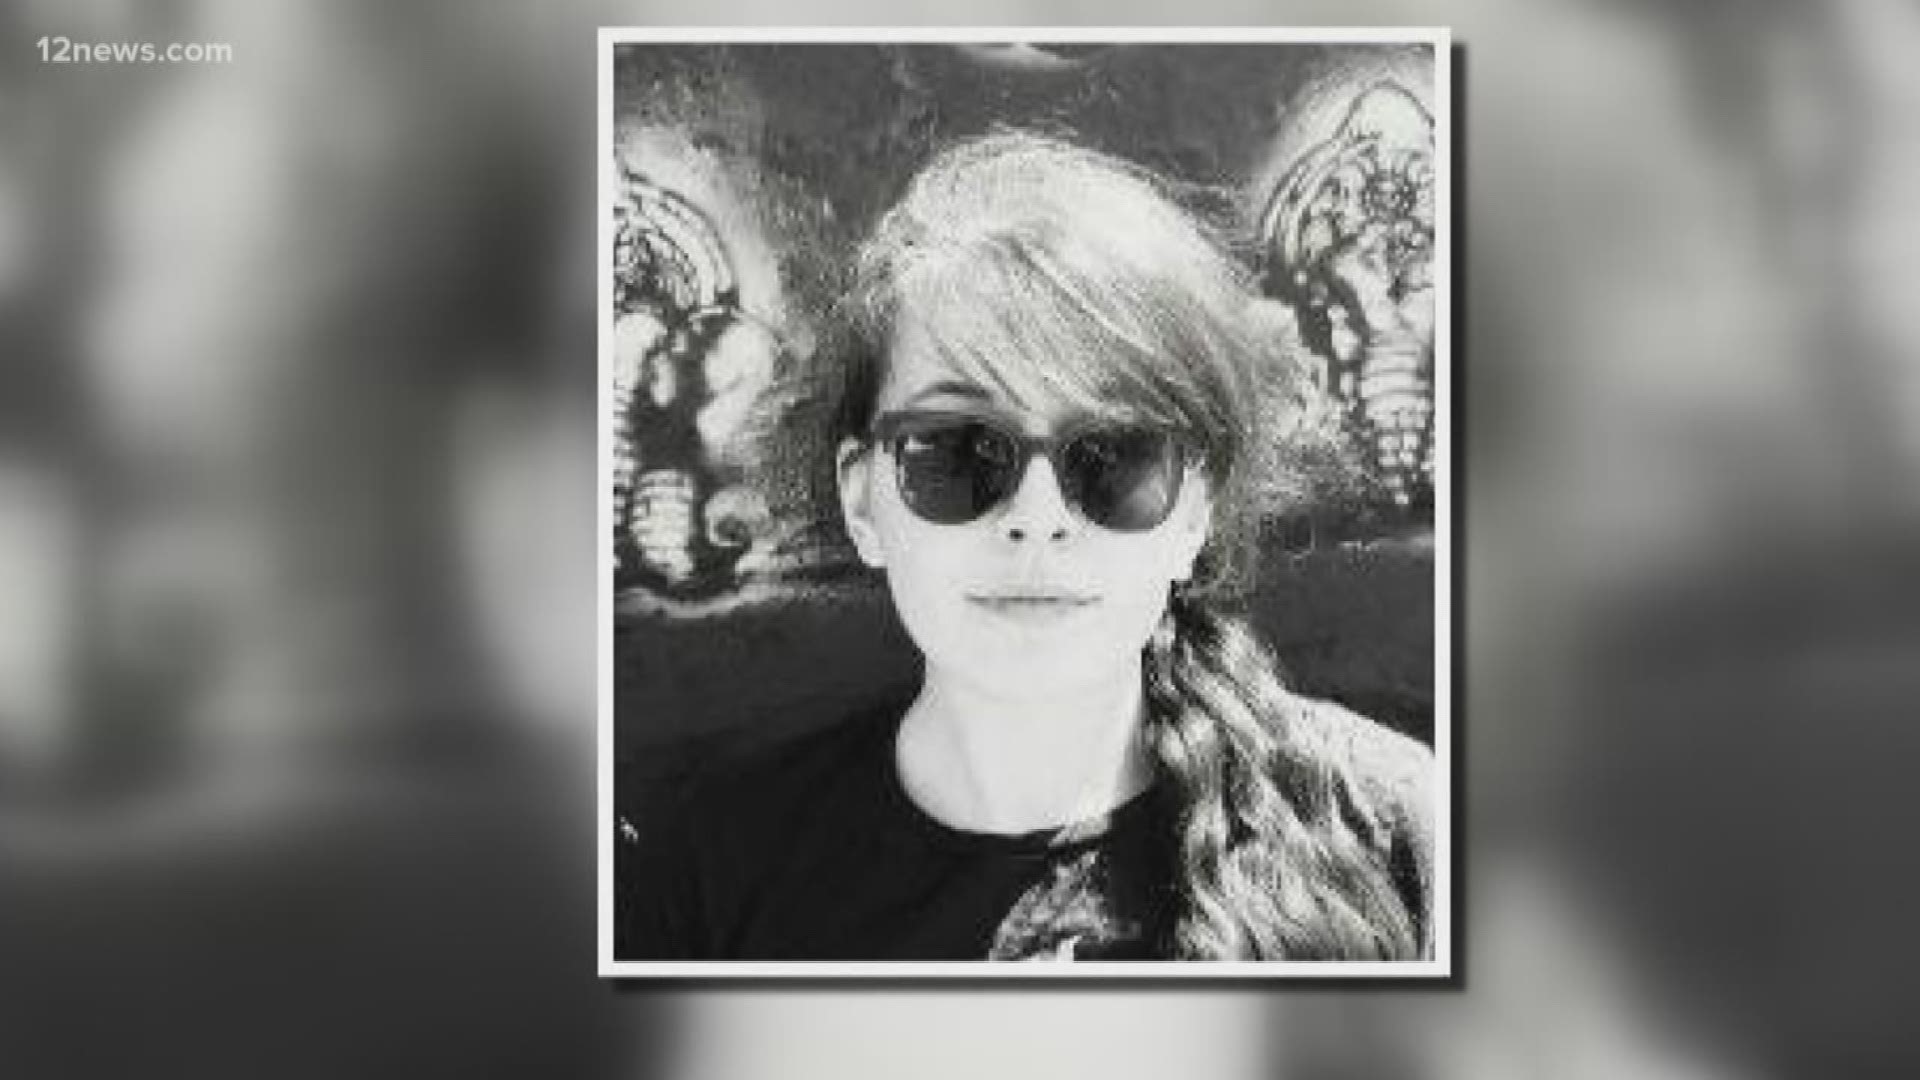 A transgender student's art project turns into a classroom standoff. A Chandler teacher refused to accept the piece because it conflicted her religious beliefs.